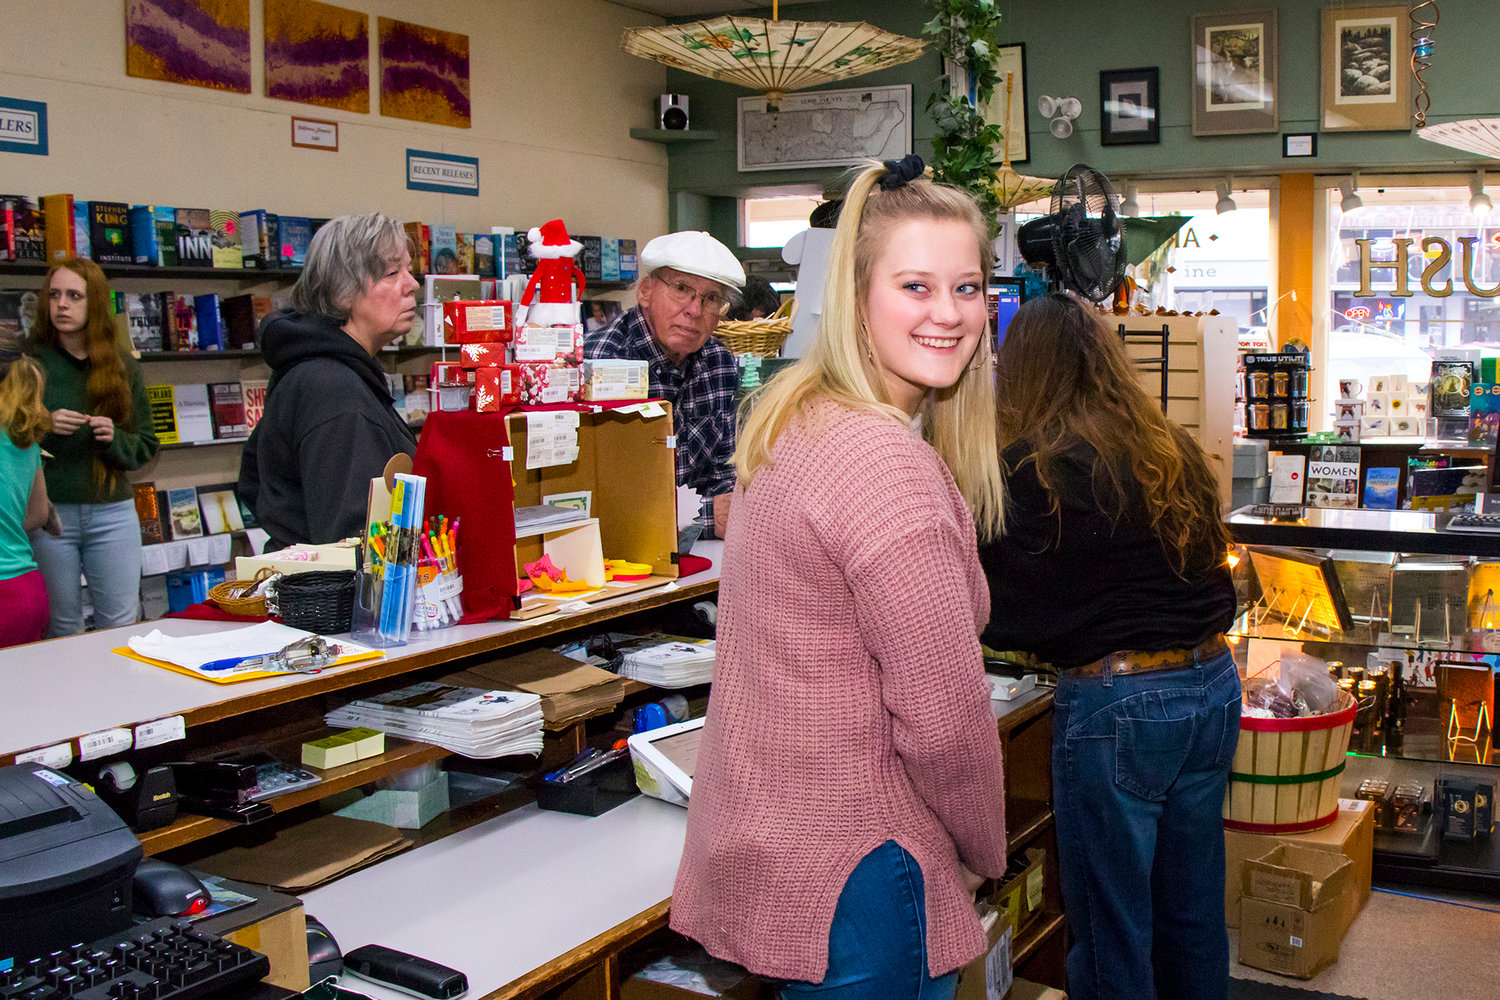 Abby Jennings looks back and smiles while helping inside Book 'N' Brush Friday afternoon in Chehalis.